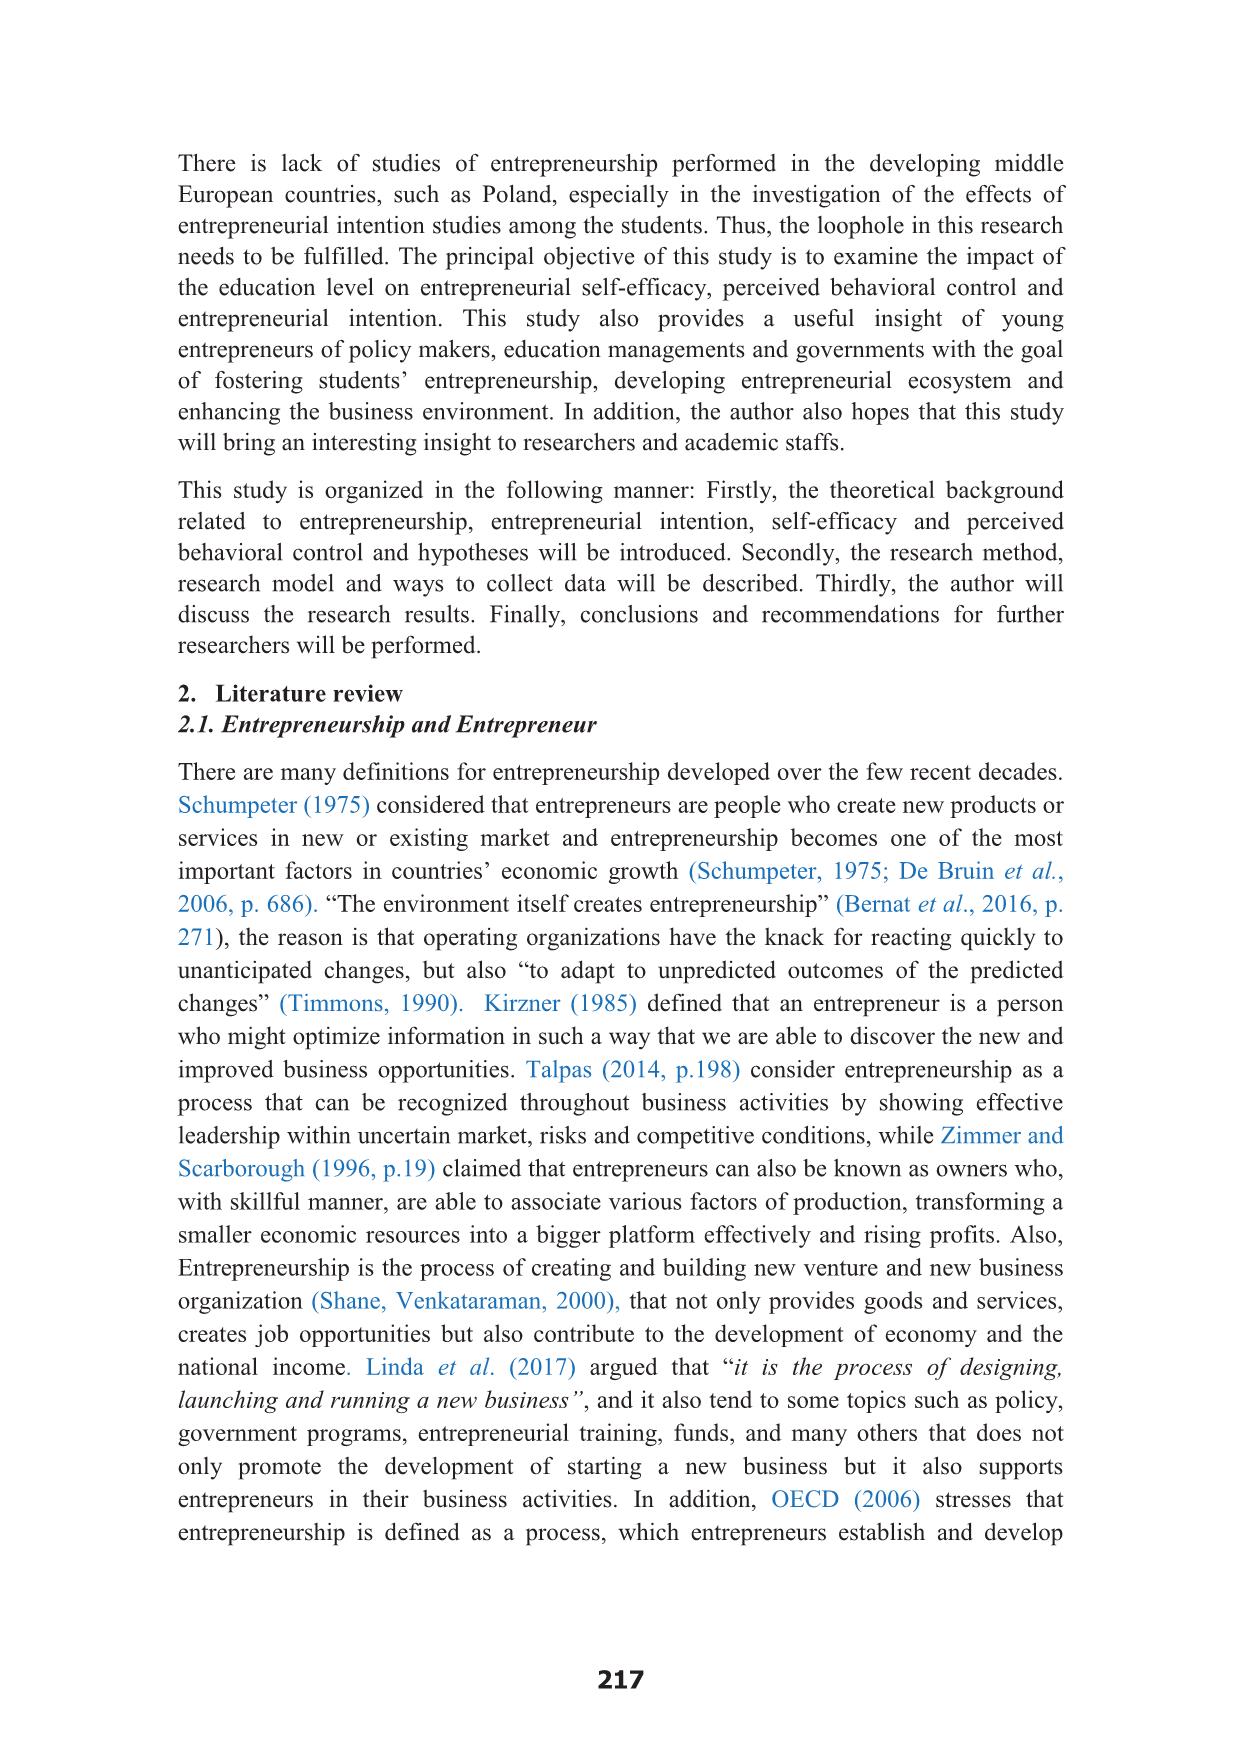 Self-efficacy, perceived behavioral control and entrepreneurial intention among polish students in the context of industry 4.0: Assessing the effect of education level trang 3